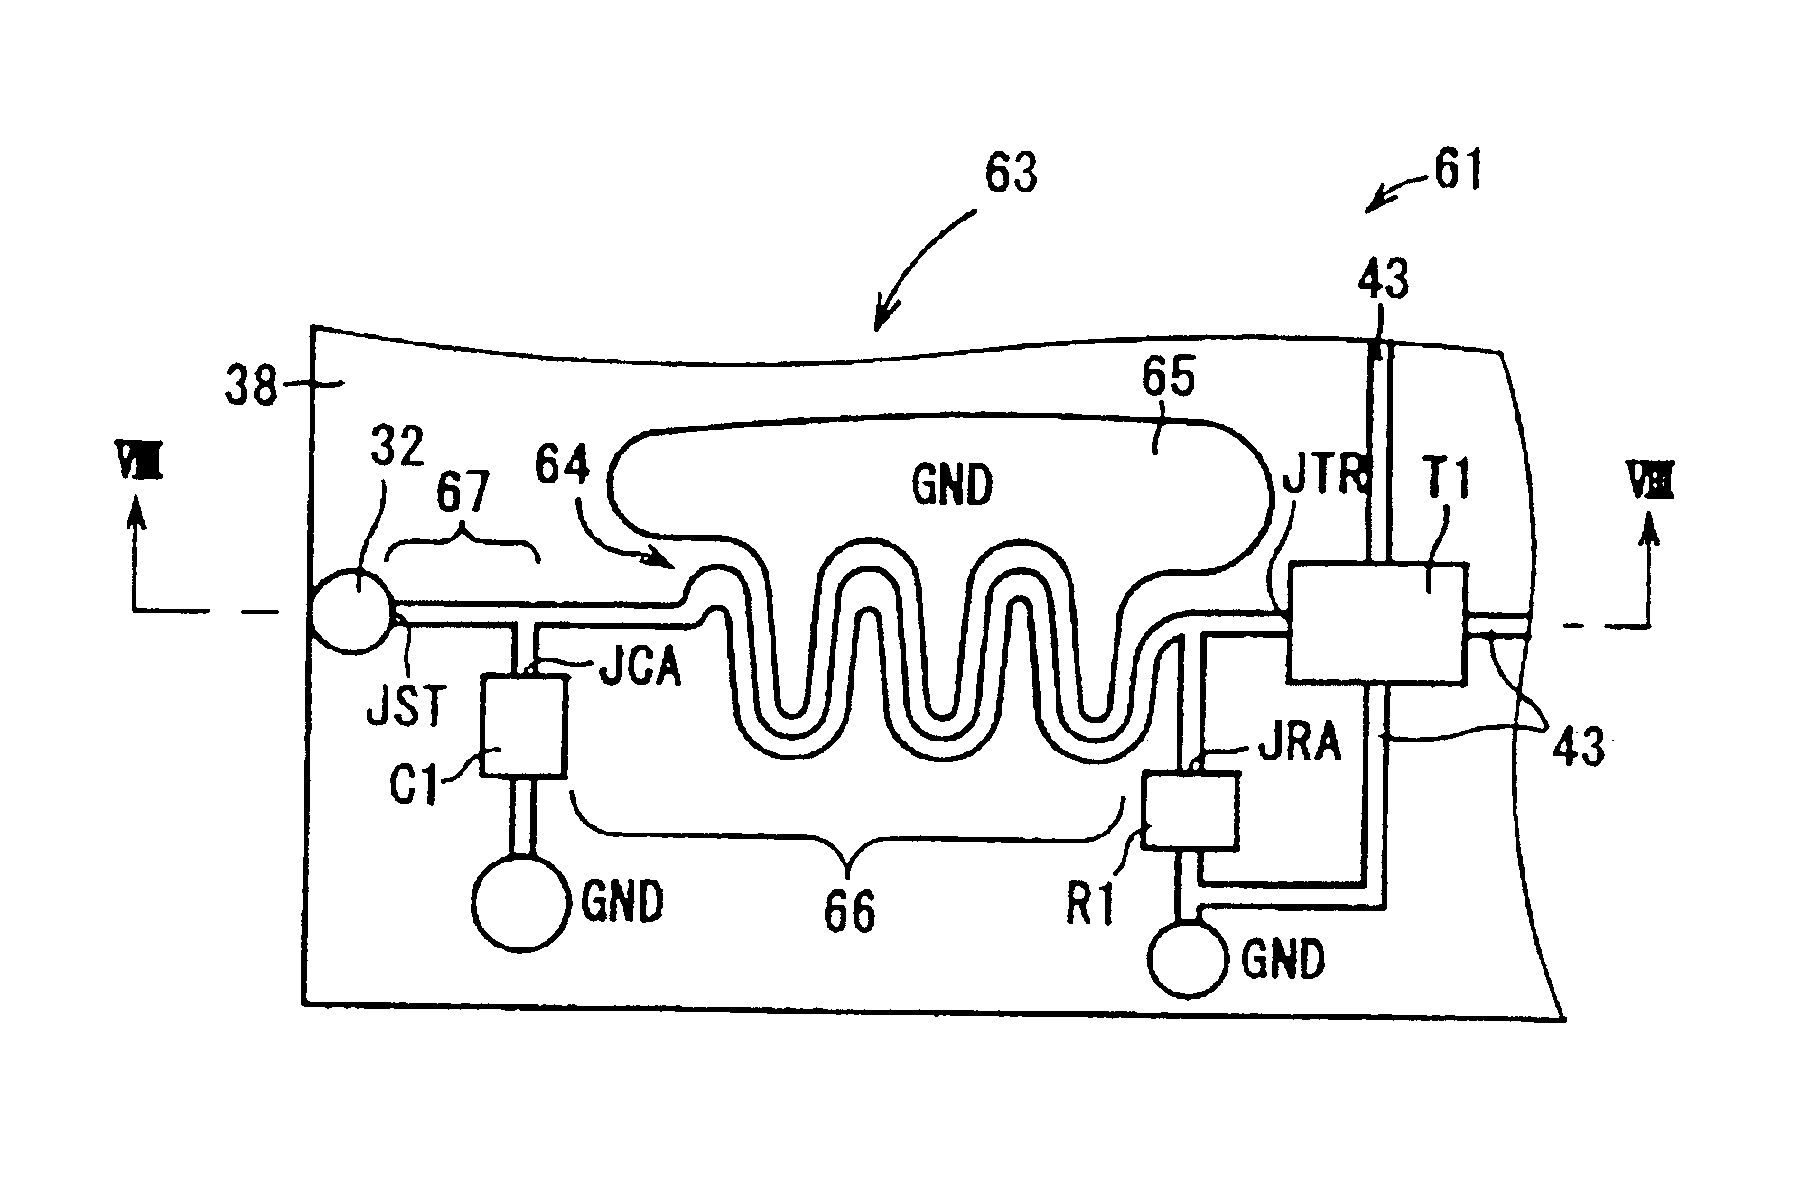 Signal transmission circuit and electronic equipment